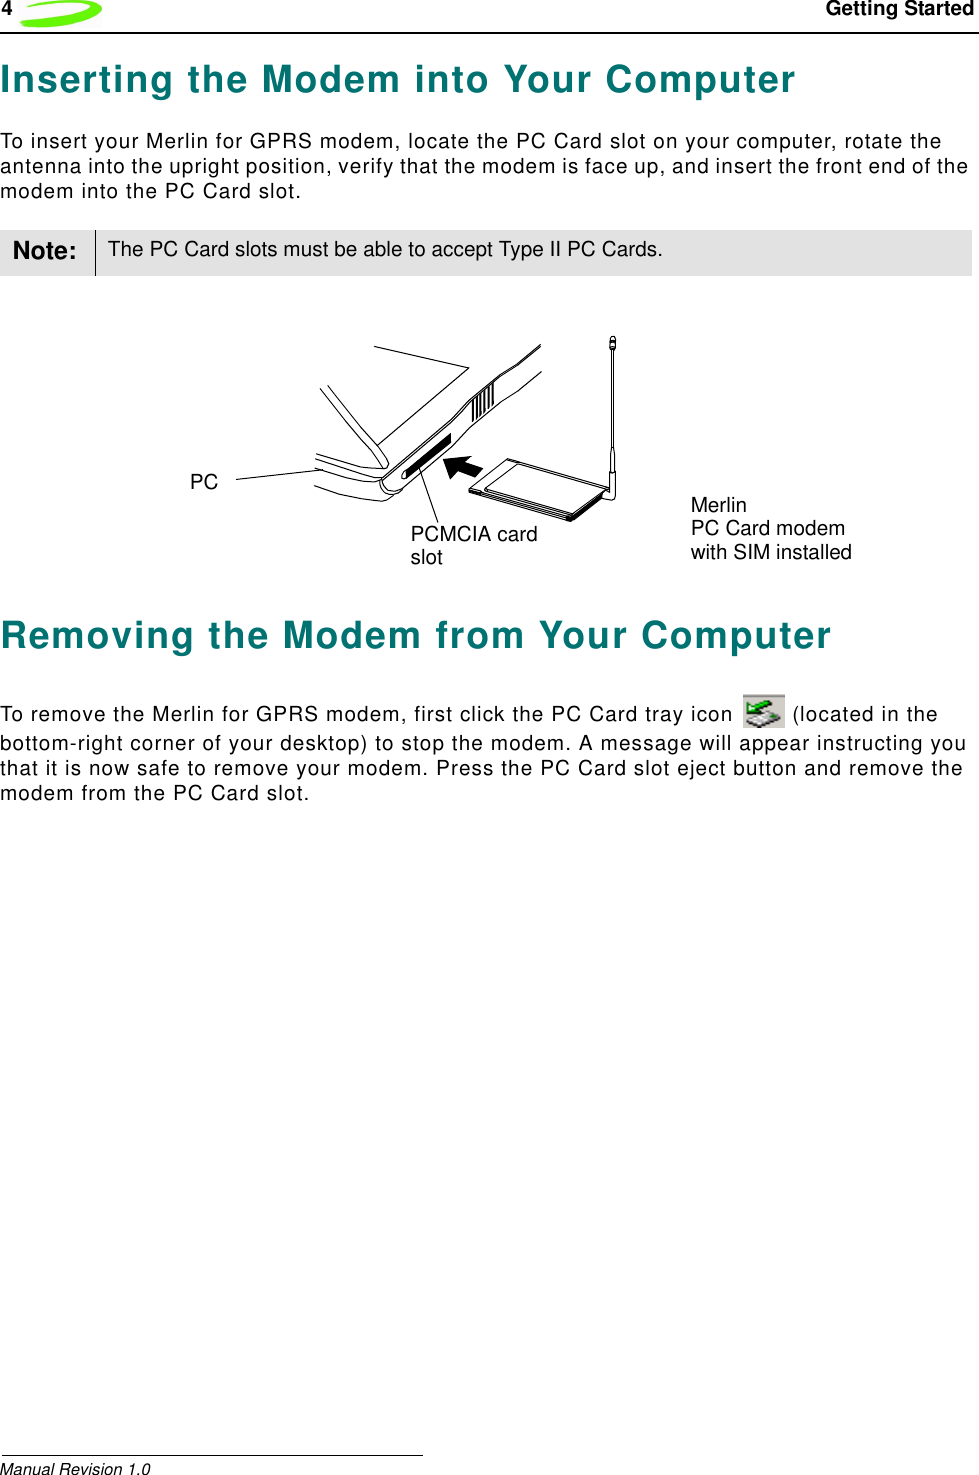 4 Getting StartedManual Revision 1.0Inserting the Modem into Your ComputerTo insert your Merlin for GPRS modem, locate the PC Card slot on your computer, rotate the antenna into the upright position, verify that the modem is face up, and insert the front end of the modem into the PC Card slot.Removing the Modem from Your ComputerTo remove the Merlin for GPRS modem, first click the PC Card tray icon   (located in the bottom-right corner of your desktop) to stop the modem. A message will appear instructing you that it is now safe to remove your modem. Press the PC Card slot eject button and remove the modem from the PC Card slot.Note: The PC Card slots must be able to accept Type II PC Cards.MerlinPC Card modemPCMCIA cardslot with SIM installedPC